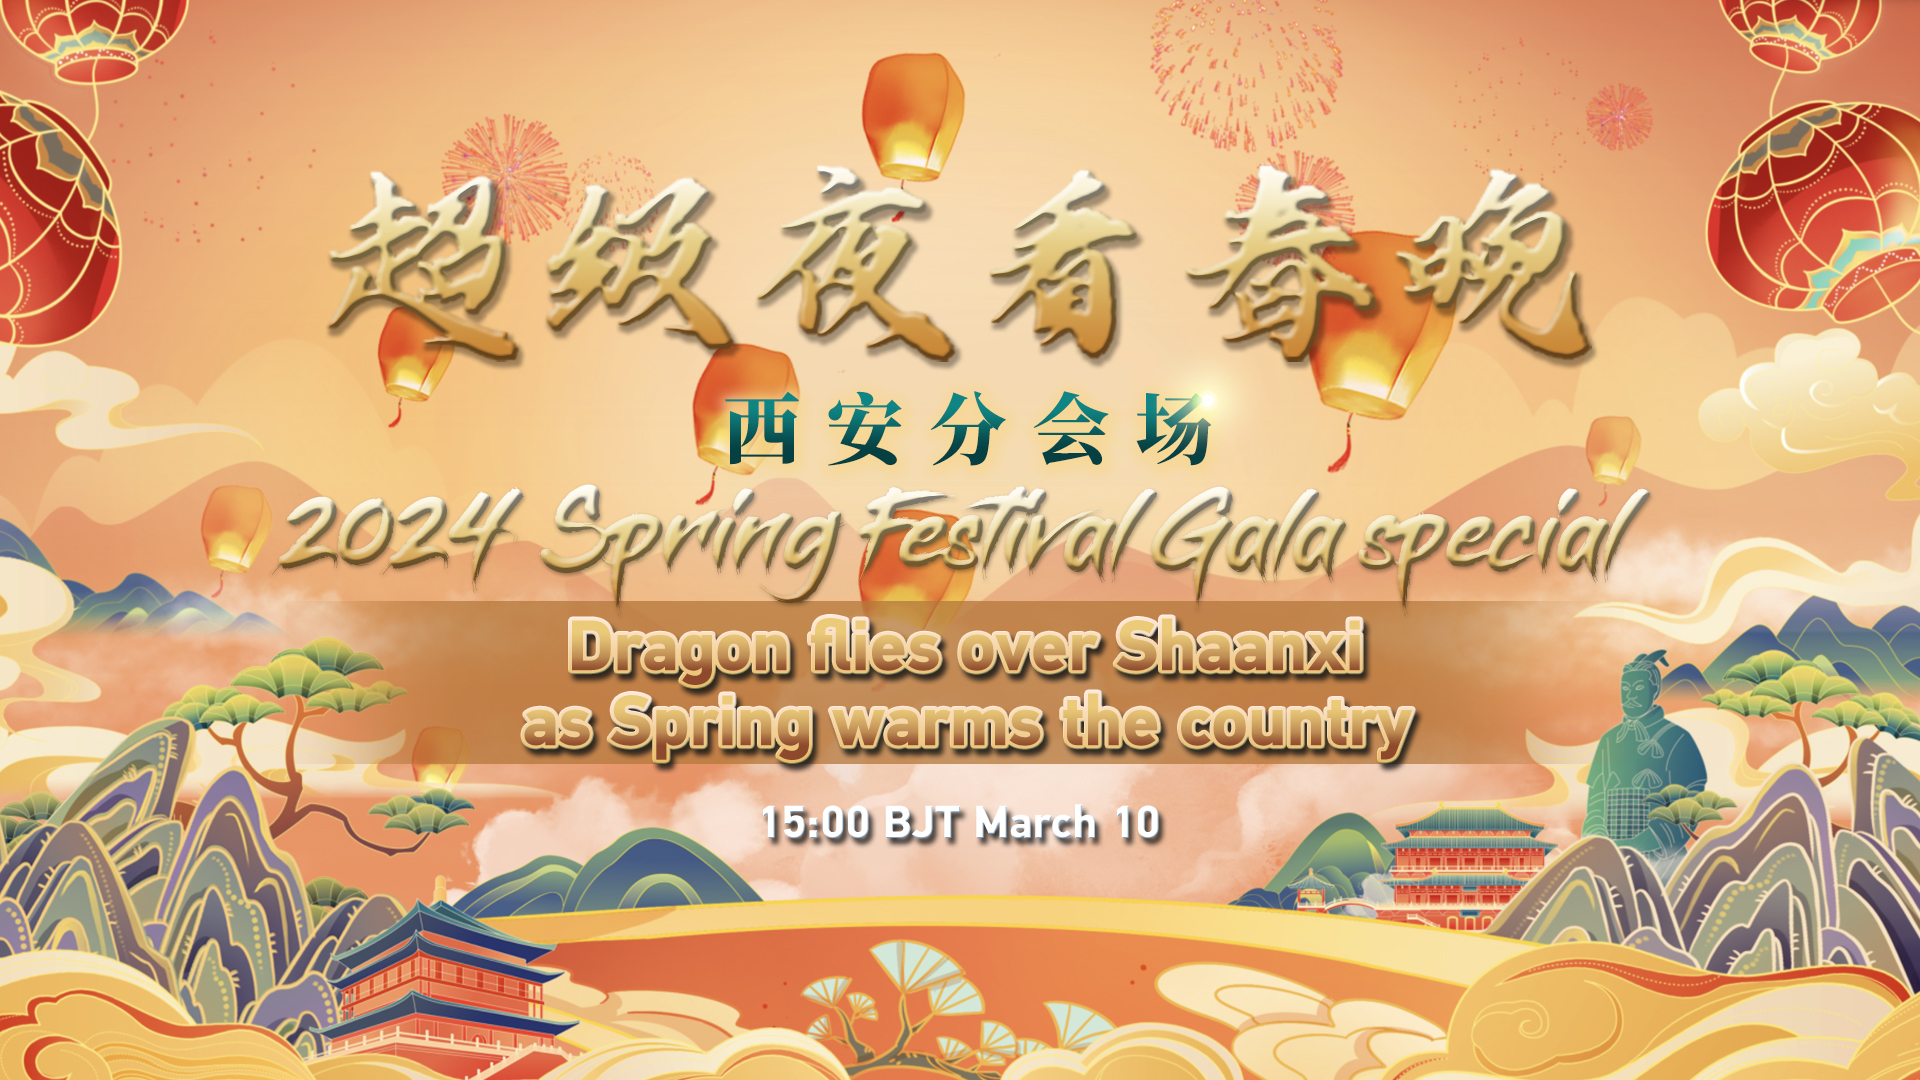 Live: 2024 Spring Festival Gala special - Dragon flies over Shaanxi